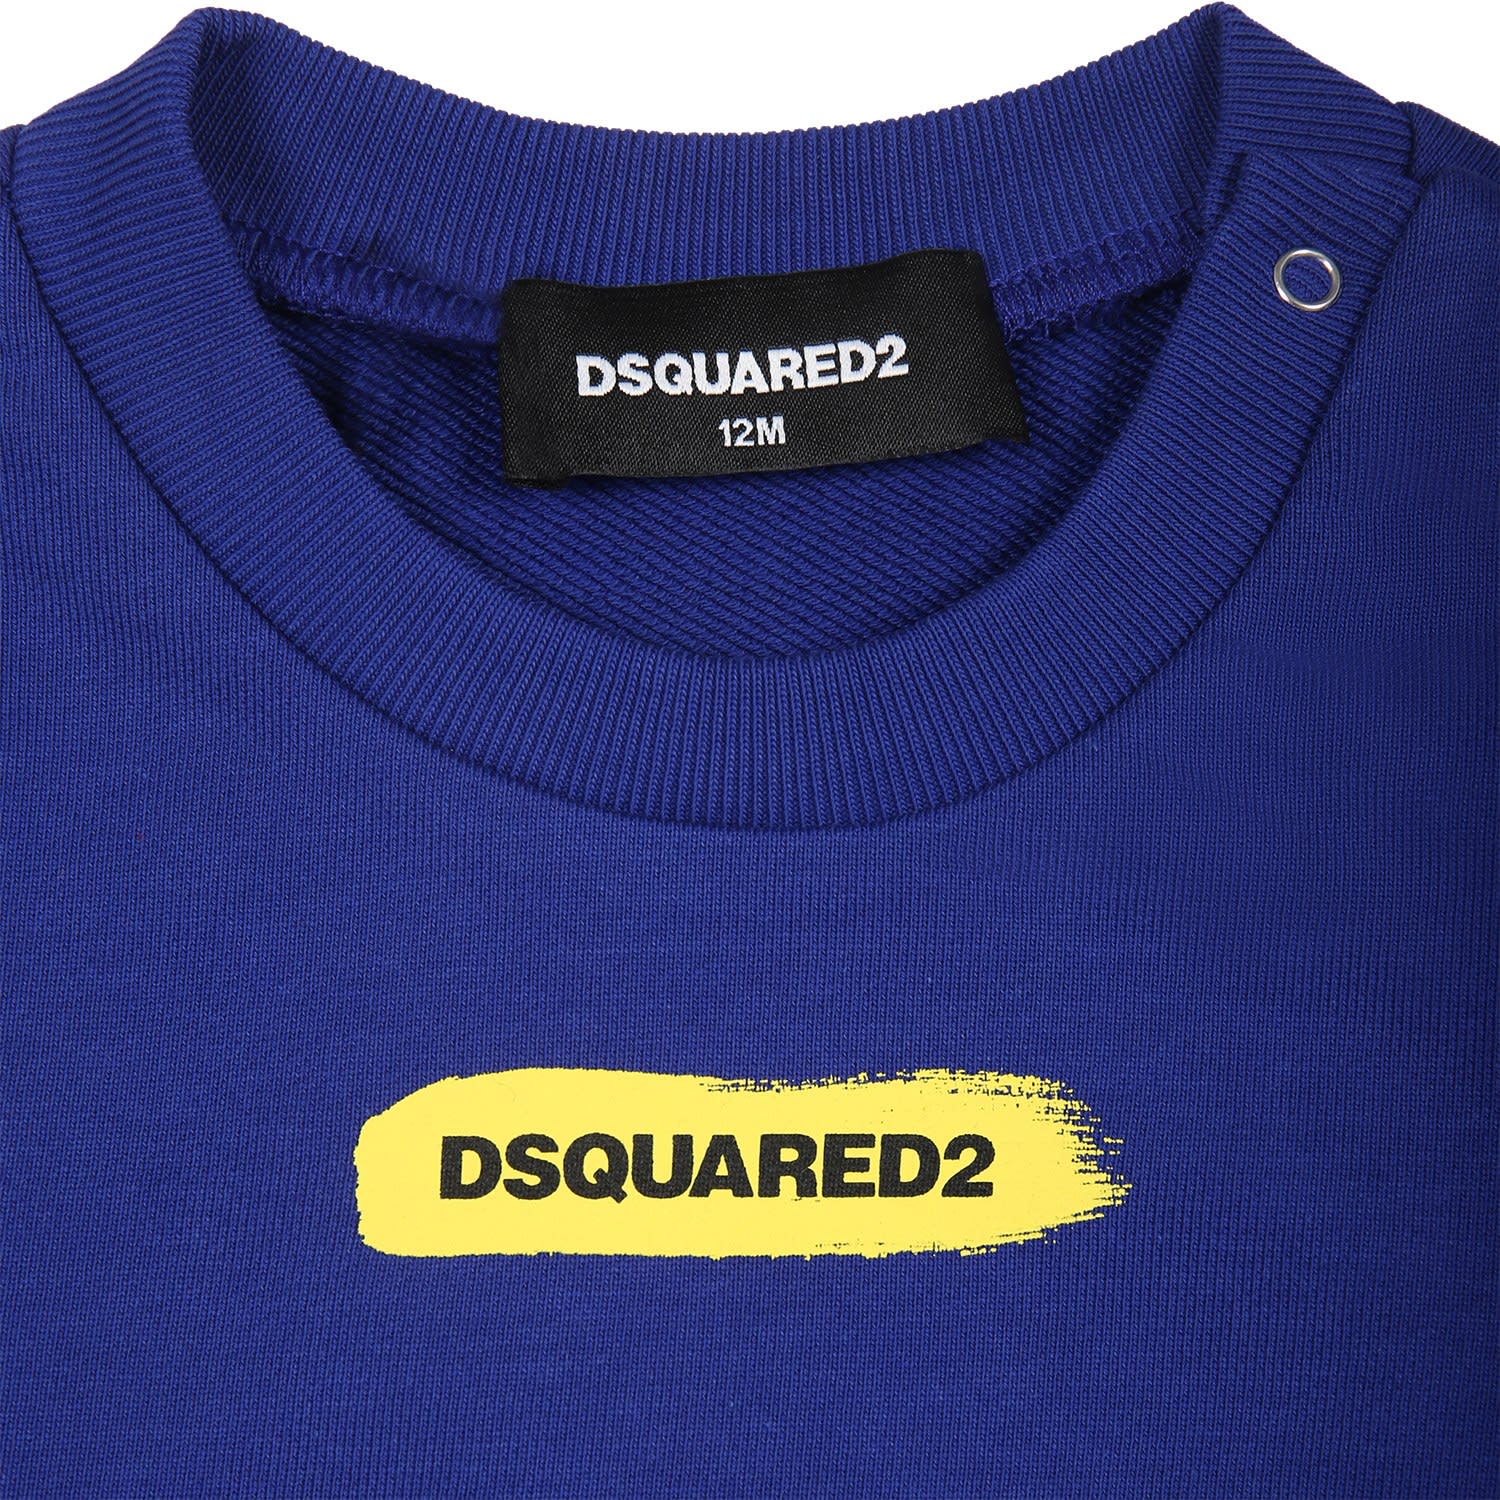 Shop Dsquared2 Light Blue Sweatshirt For Baby Boy With Logo